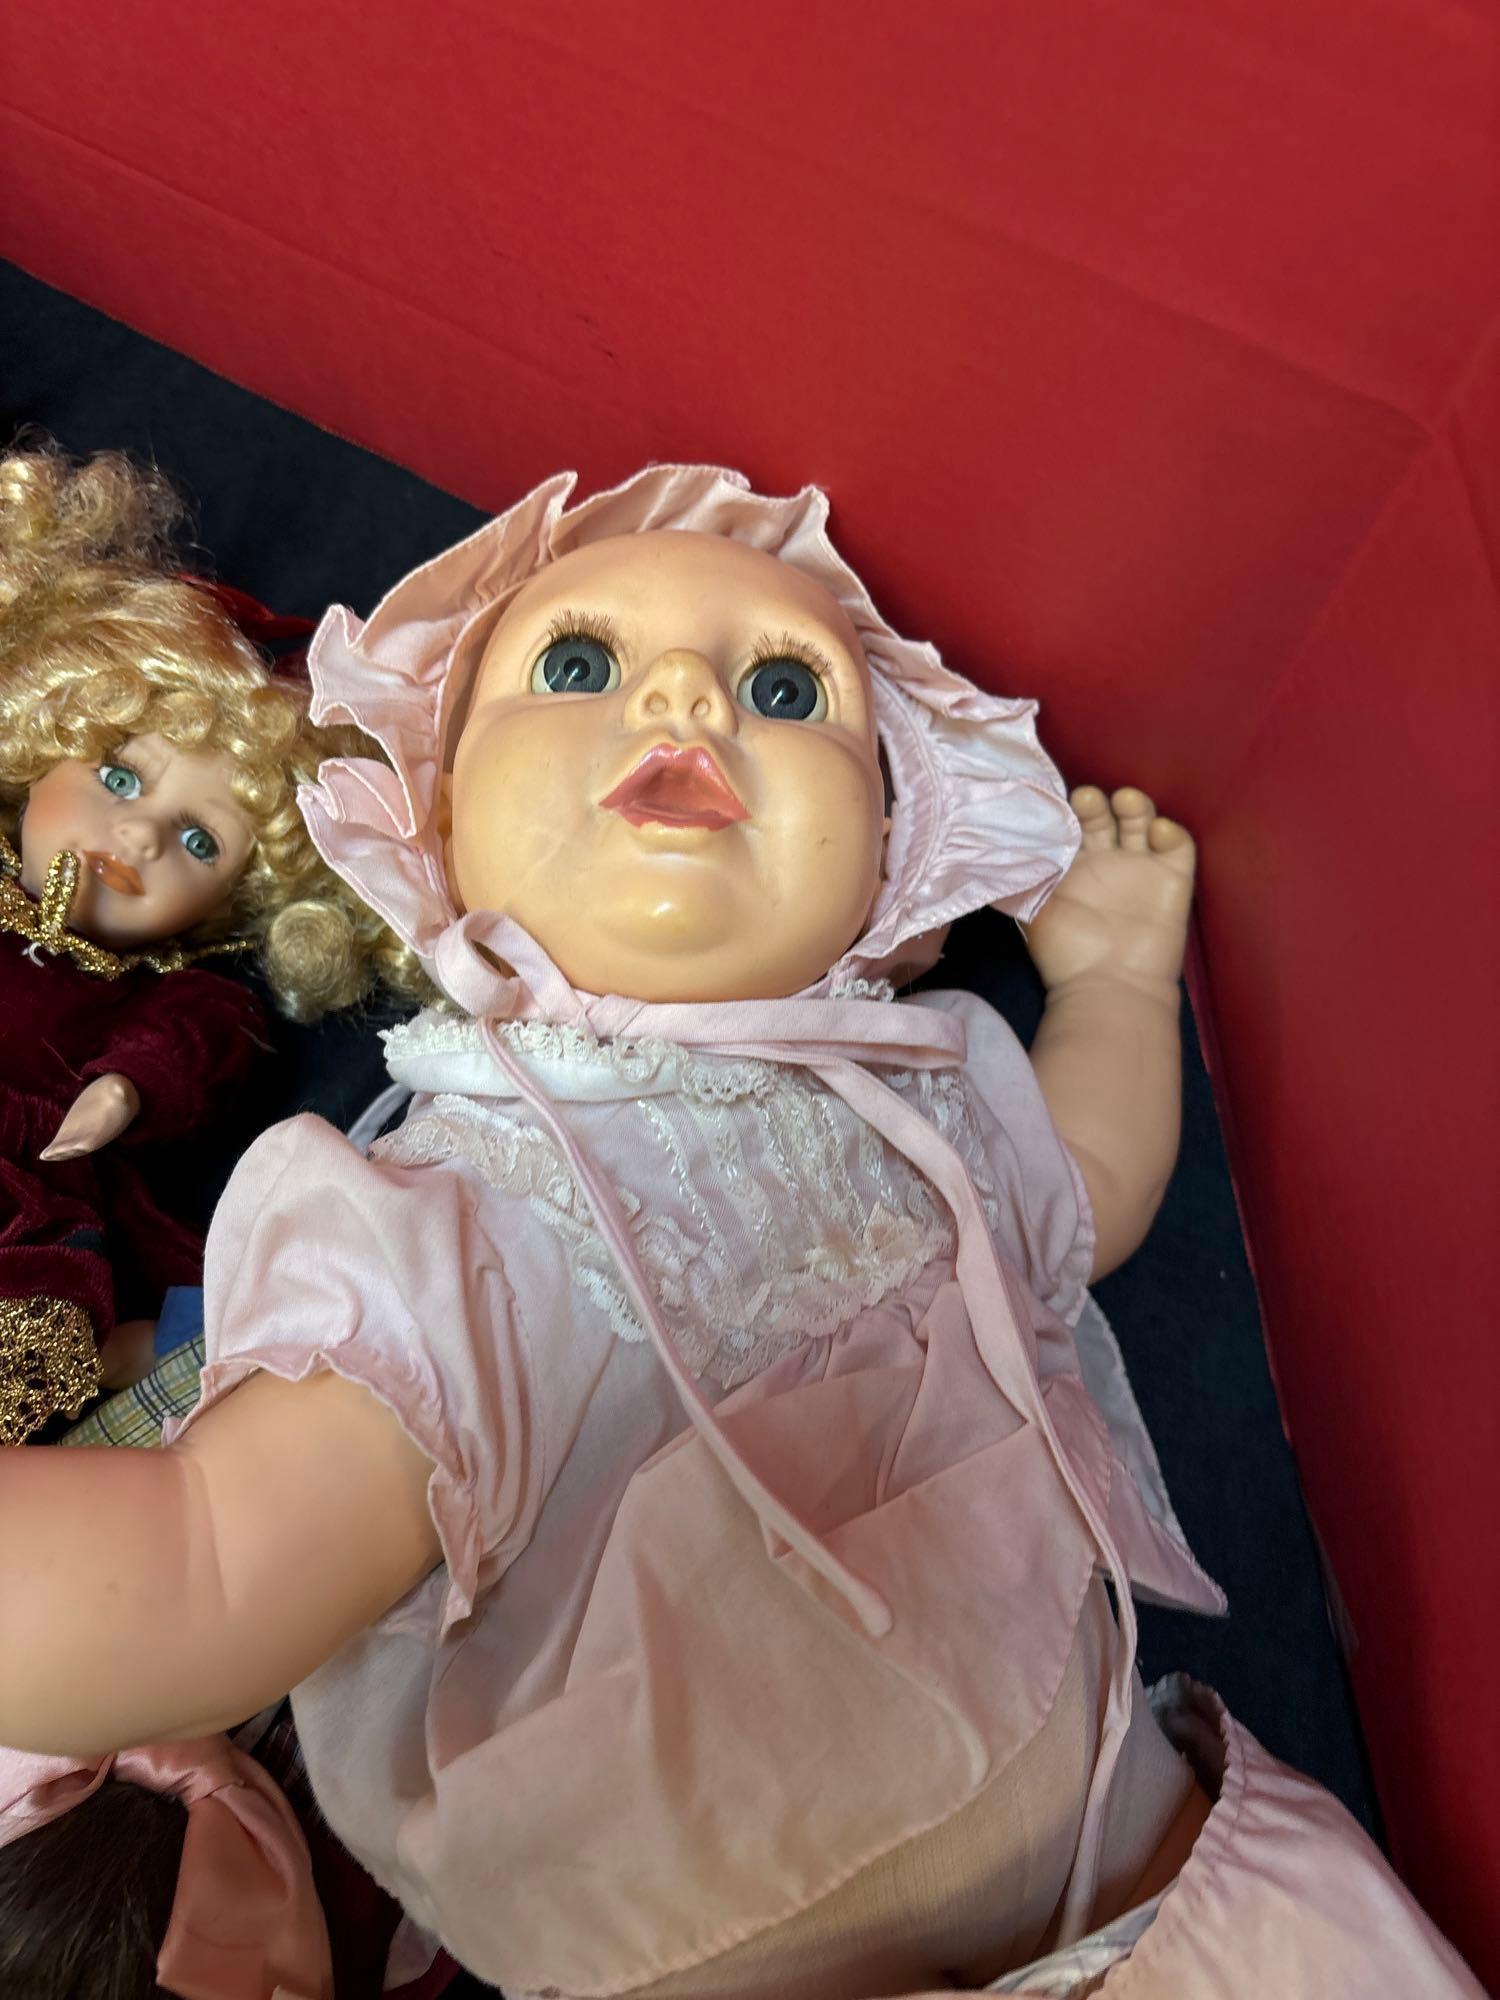 large collection of baby dolls